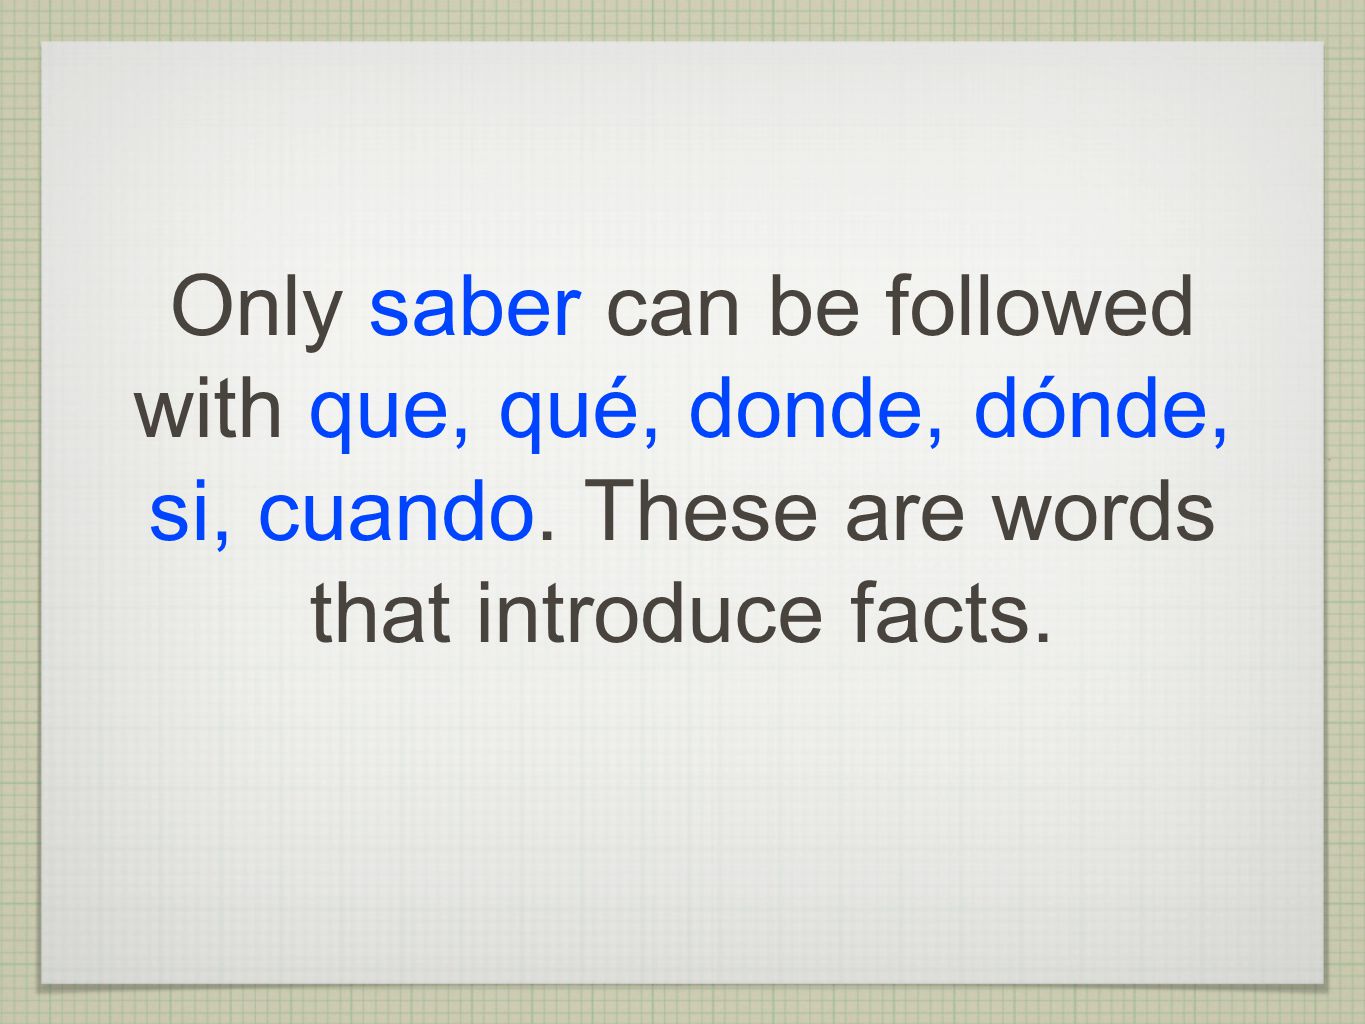 Only saber can be followed with que, qué, donde, dónde, si, cuando